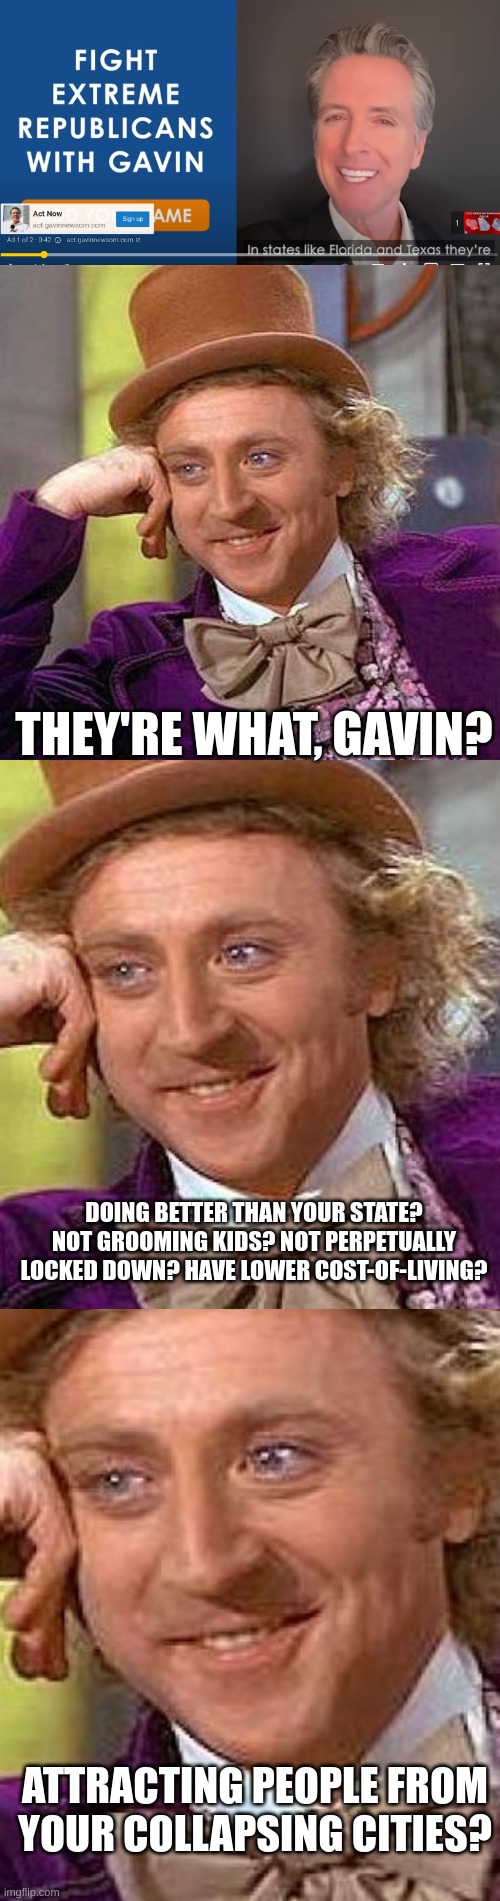 Gavin Newsom running ads... | THEY'RE WHAT, GAVIN? DOING BETTER THAN YOUR STATE? NOT GROOMING KIDS? NOT PERPETUALLY LOCKED DOWN? HAVE LOWER COST-OF-LIVING? ATTRACTING PEOPLE FROM YOUR COLLAPSING CITIES? | image tagged in gavin newsom,commiefornia,french laundry,red wave coming,lets go brandon,flip cali red | made w/ Imgflip meme maker